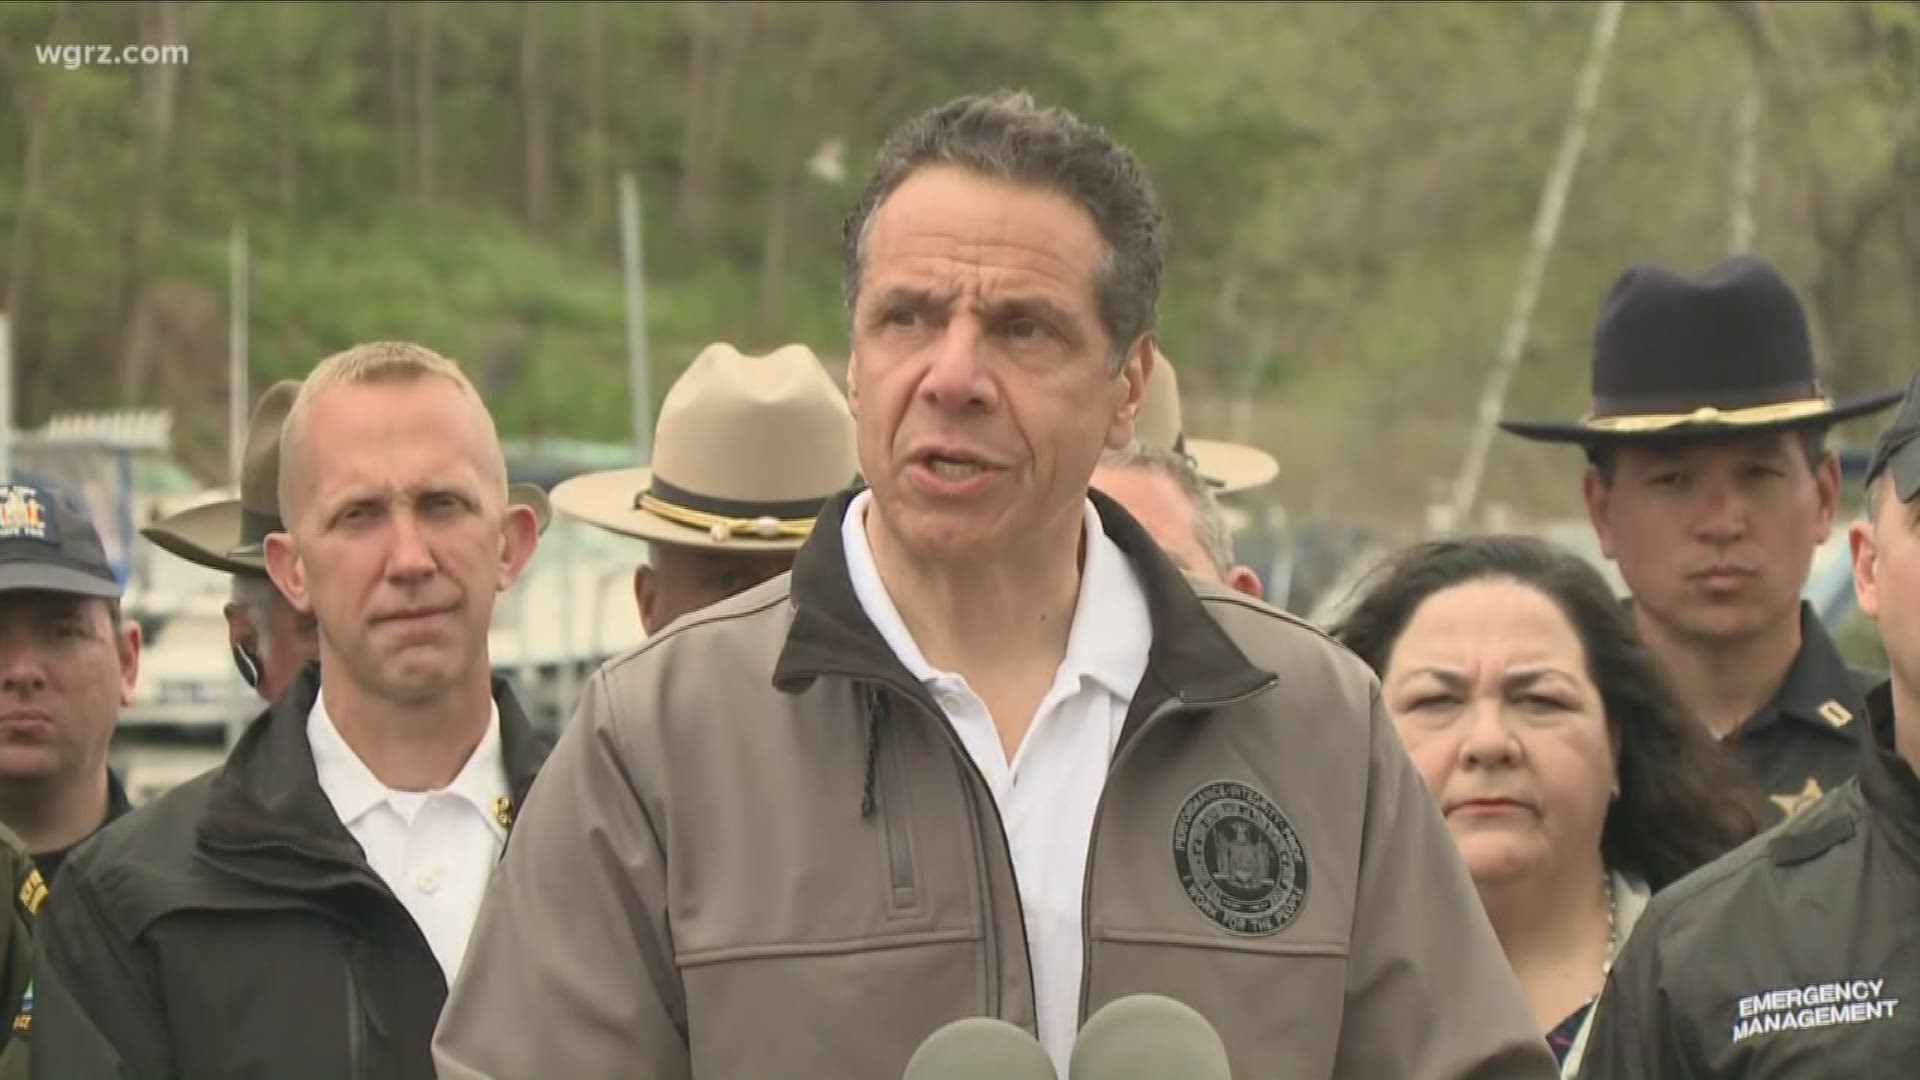 The governor says as there's no way to prevent the flooding, the only thing they can do is to take steps to mitigate its effects once it occurs.